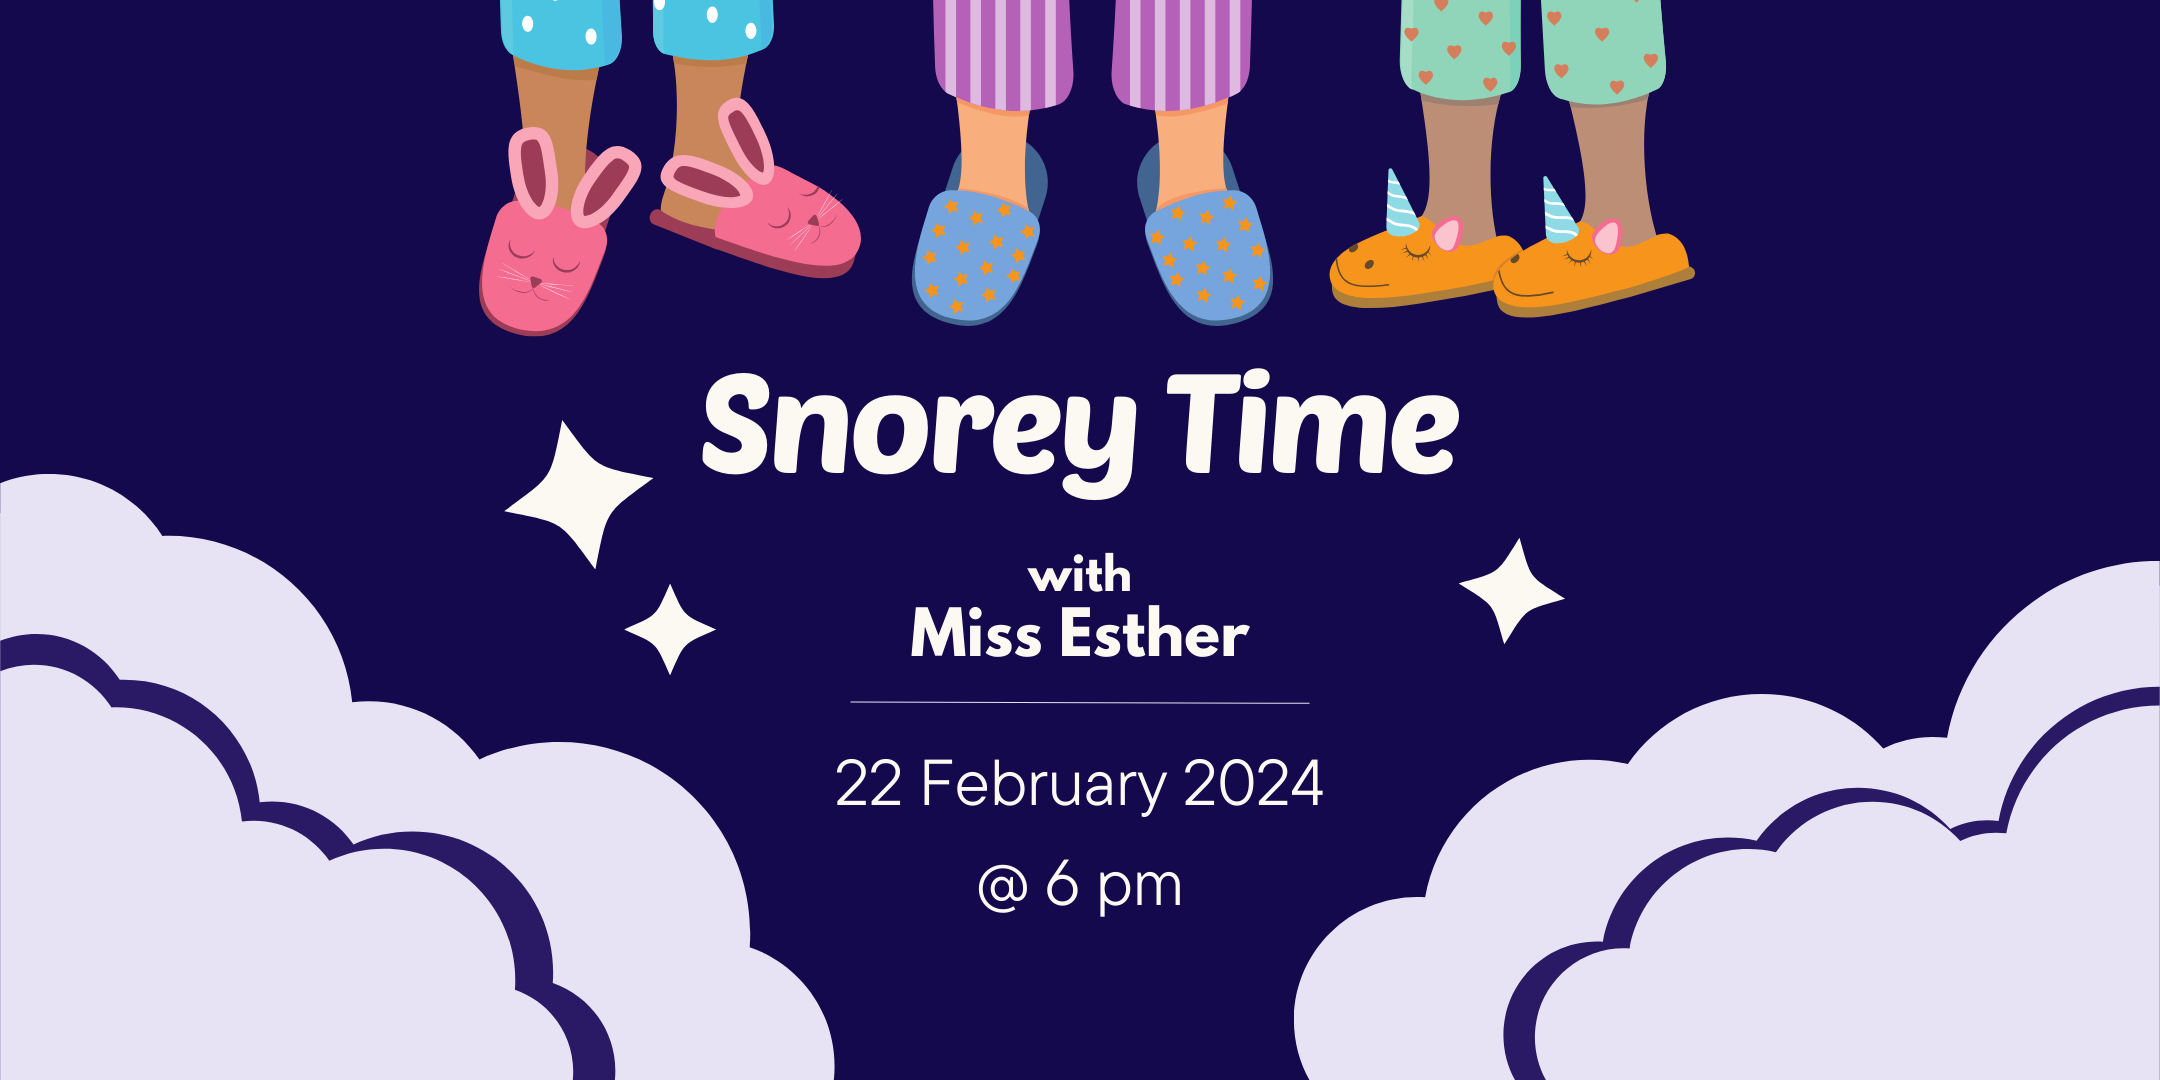 Snorey Time February 22, 2024 at 6pm.